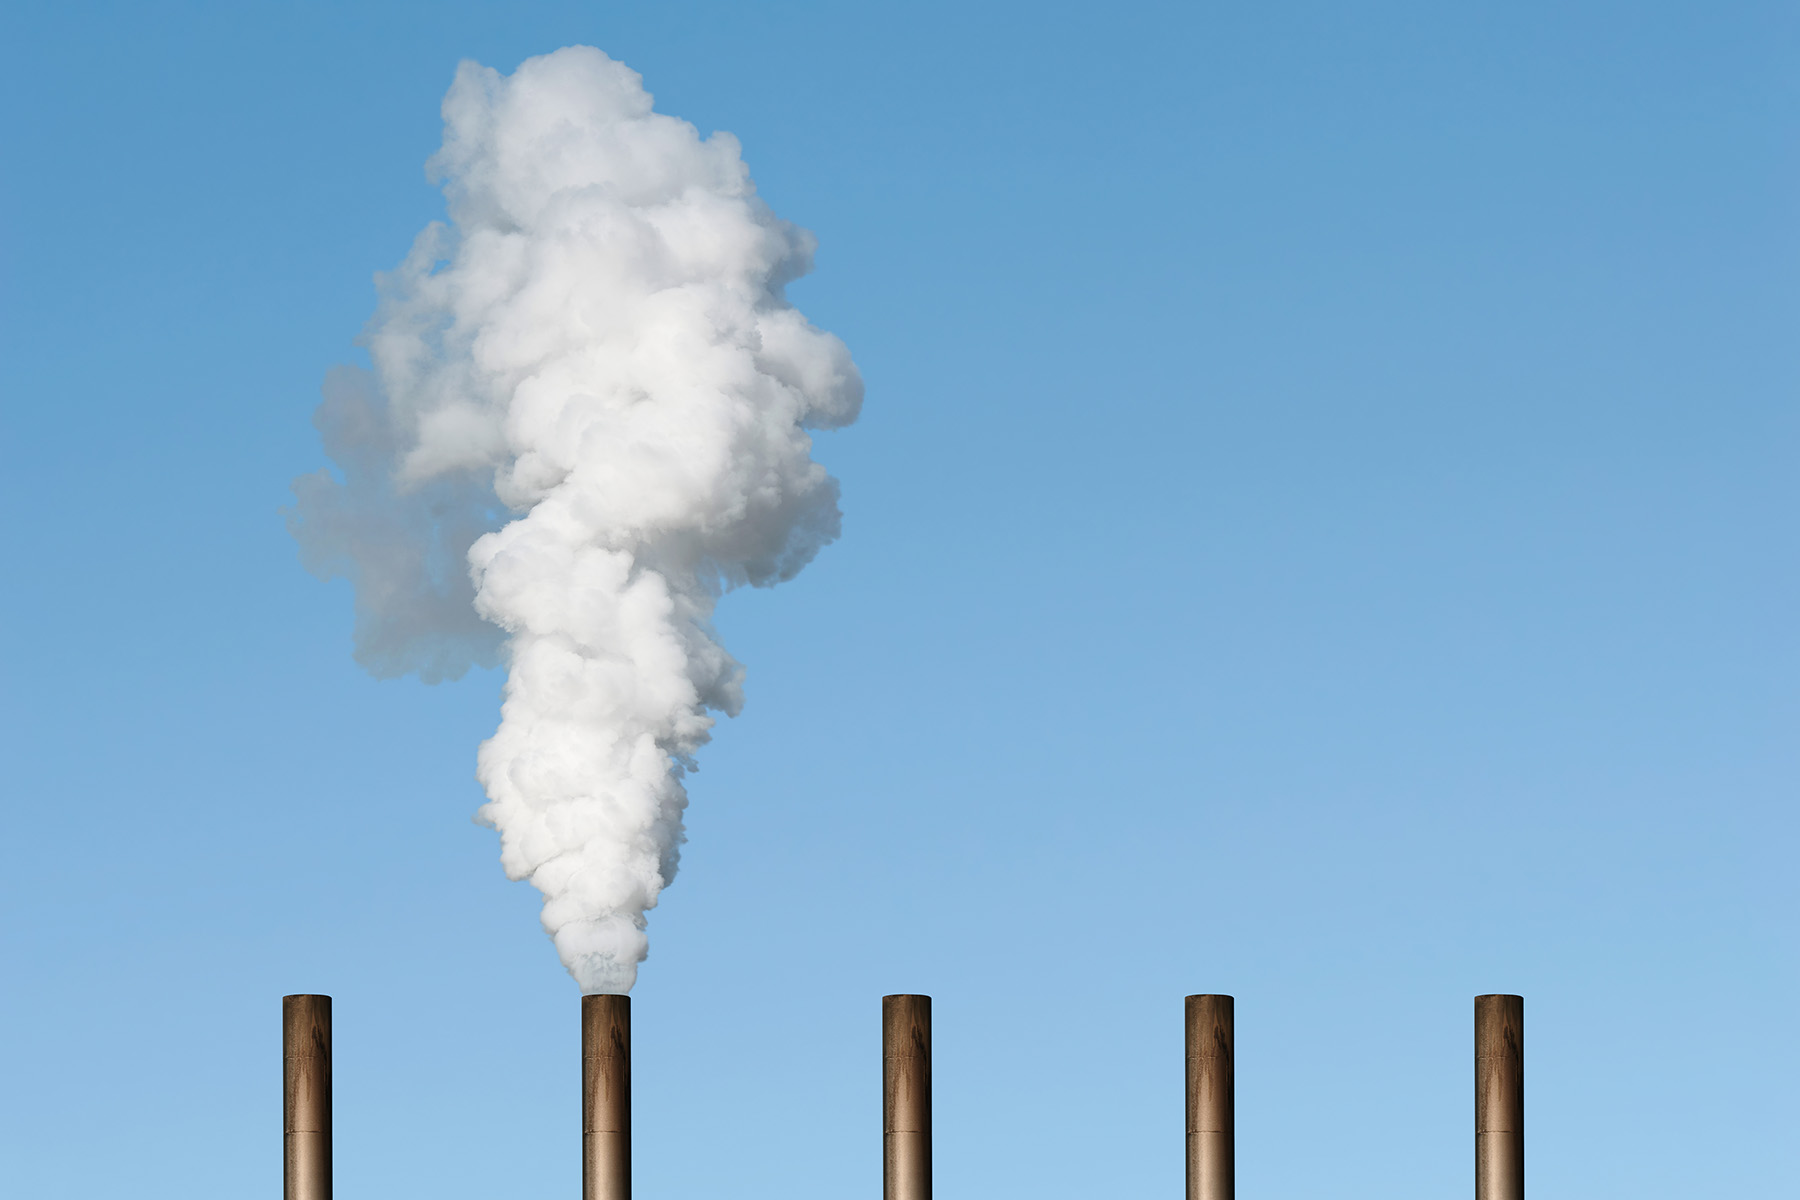 A plume of white smoke erupts from one of five smokestacks in front of a blue sky.